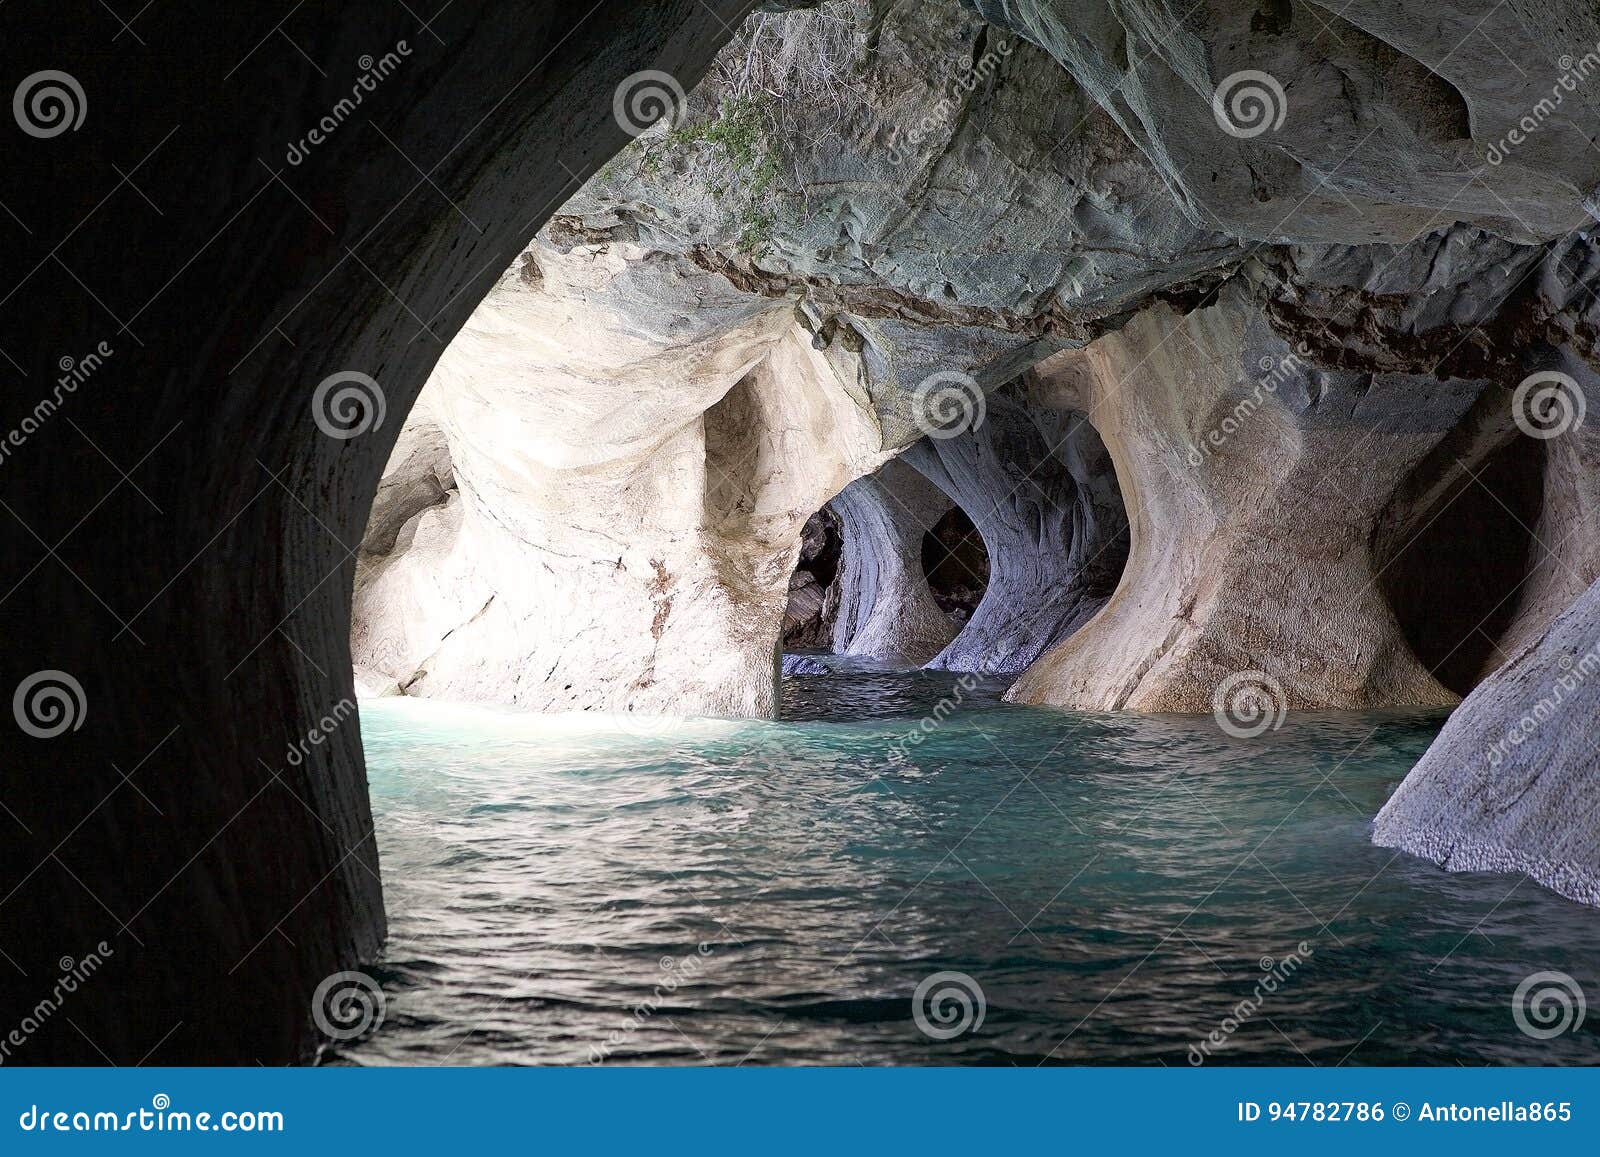 the marble cathedral at the general carrera lake, patagonia, chile